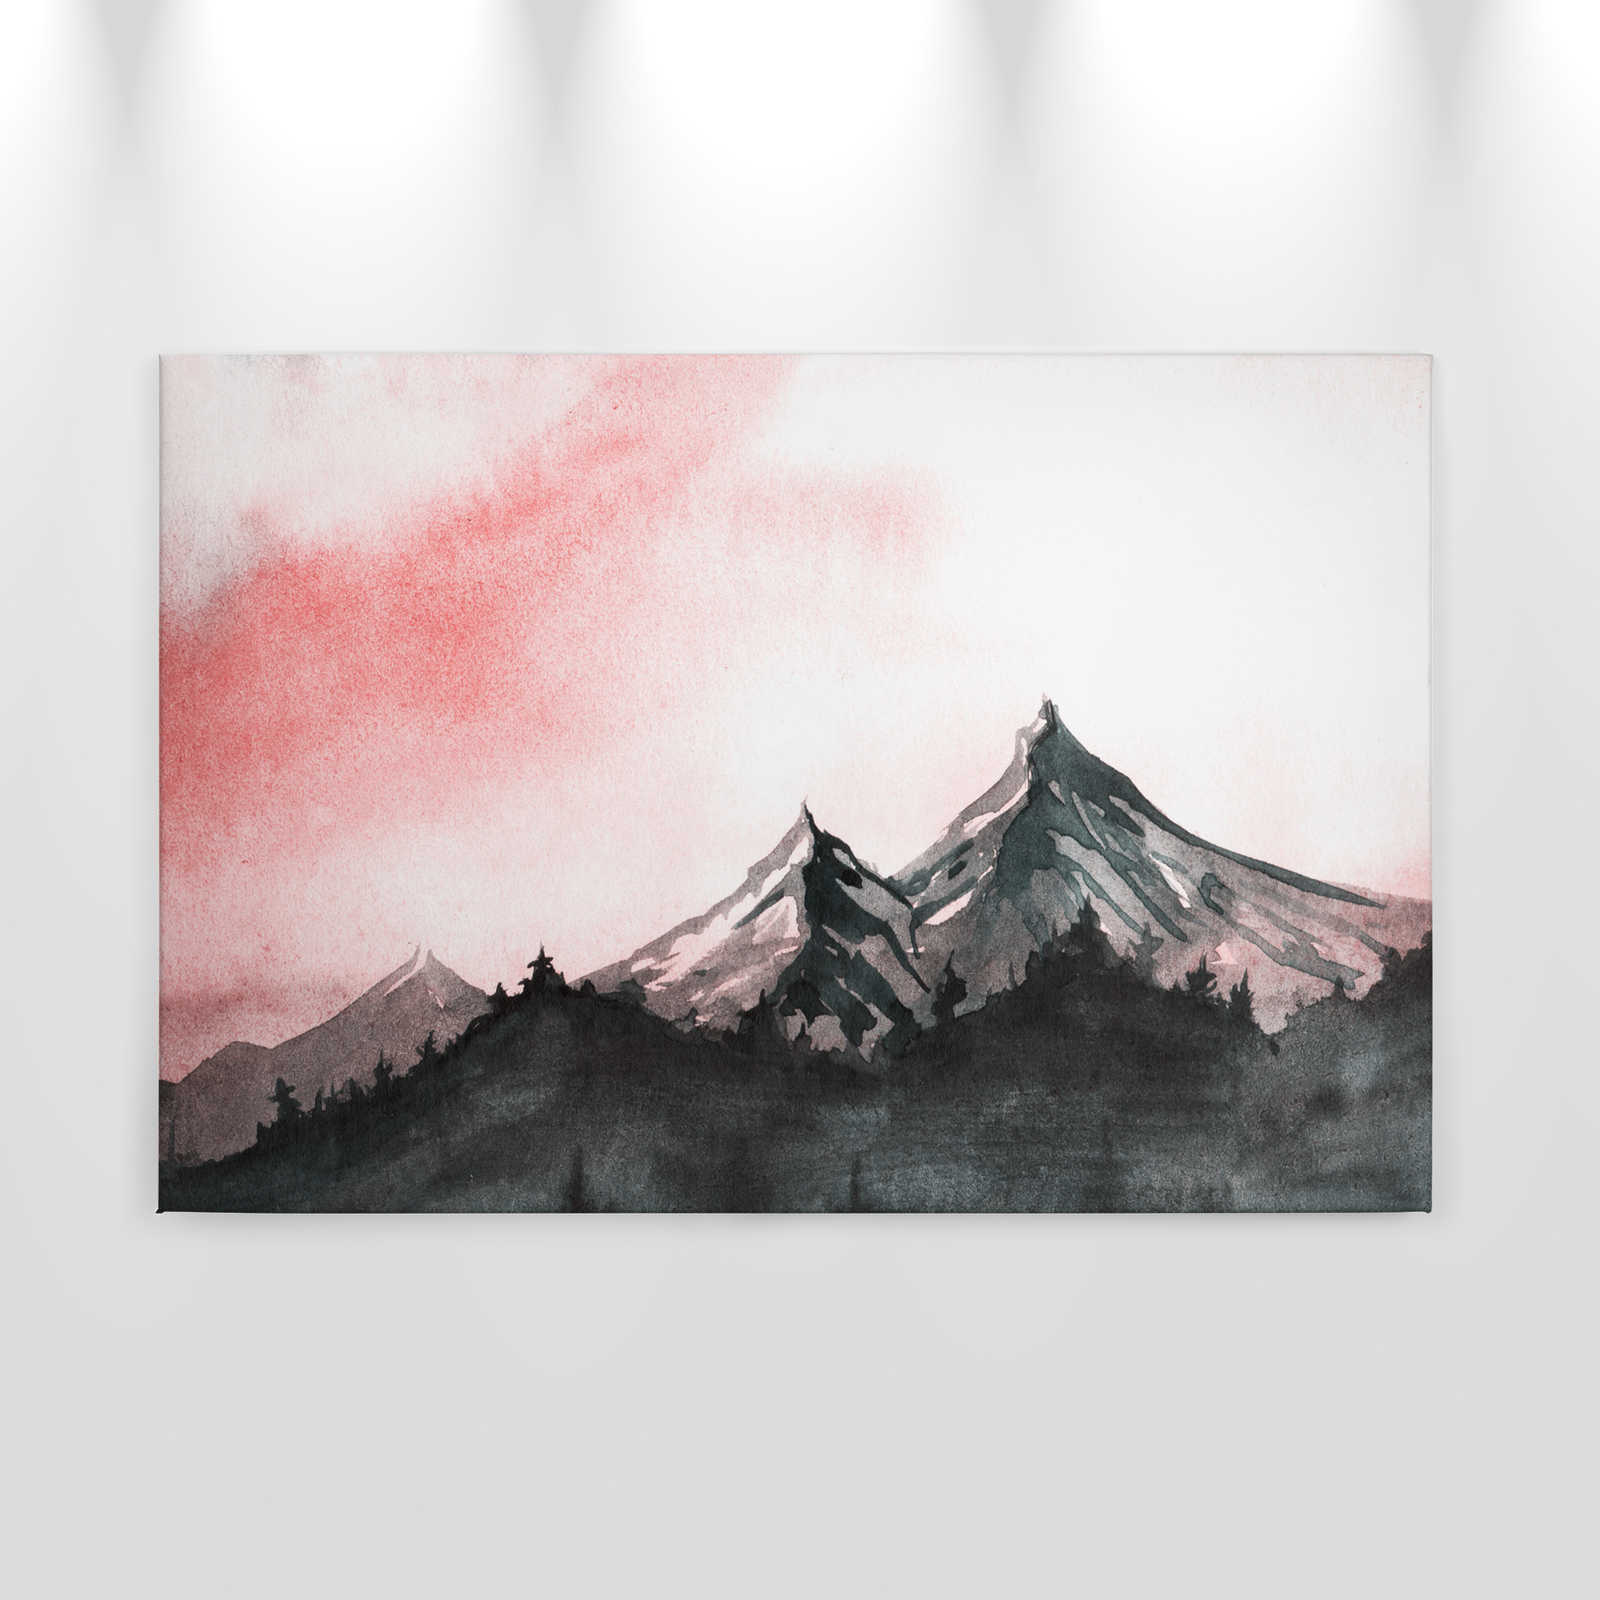             Canvas with mountain landscape in watercolour style - 0.90 m x 0.60 m
        